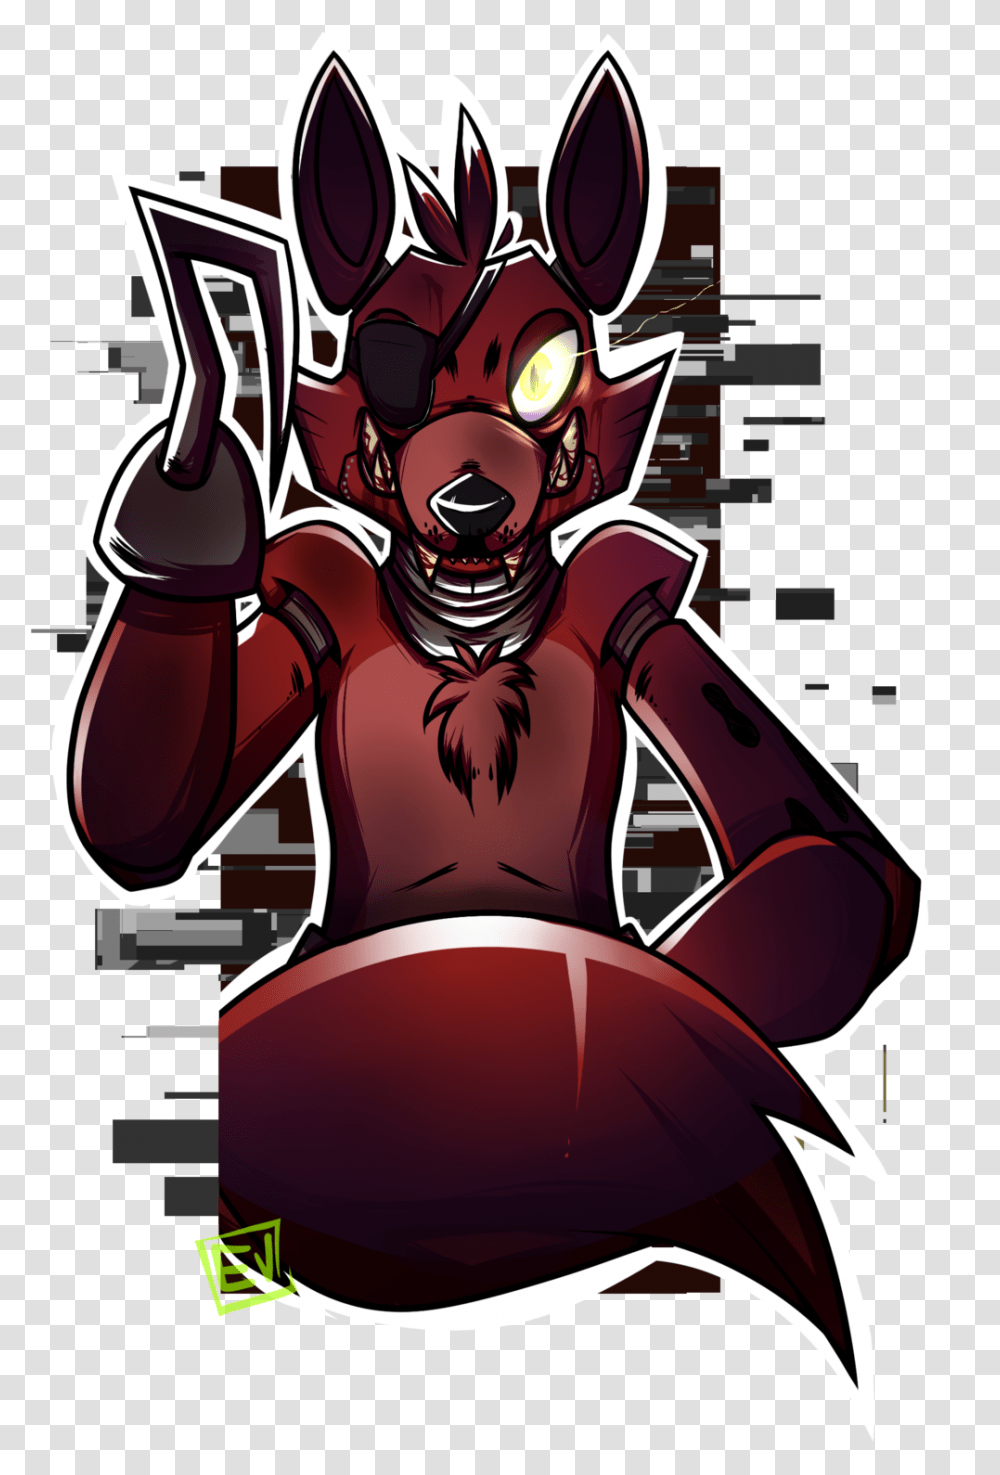 Foxy The Pirate Fanart, Hand, Dynamite, Bomb Transparent Png